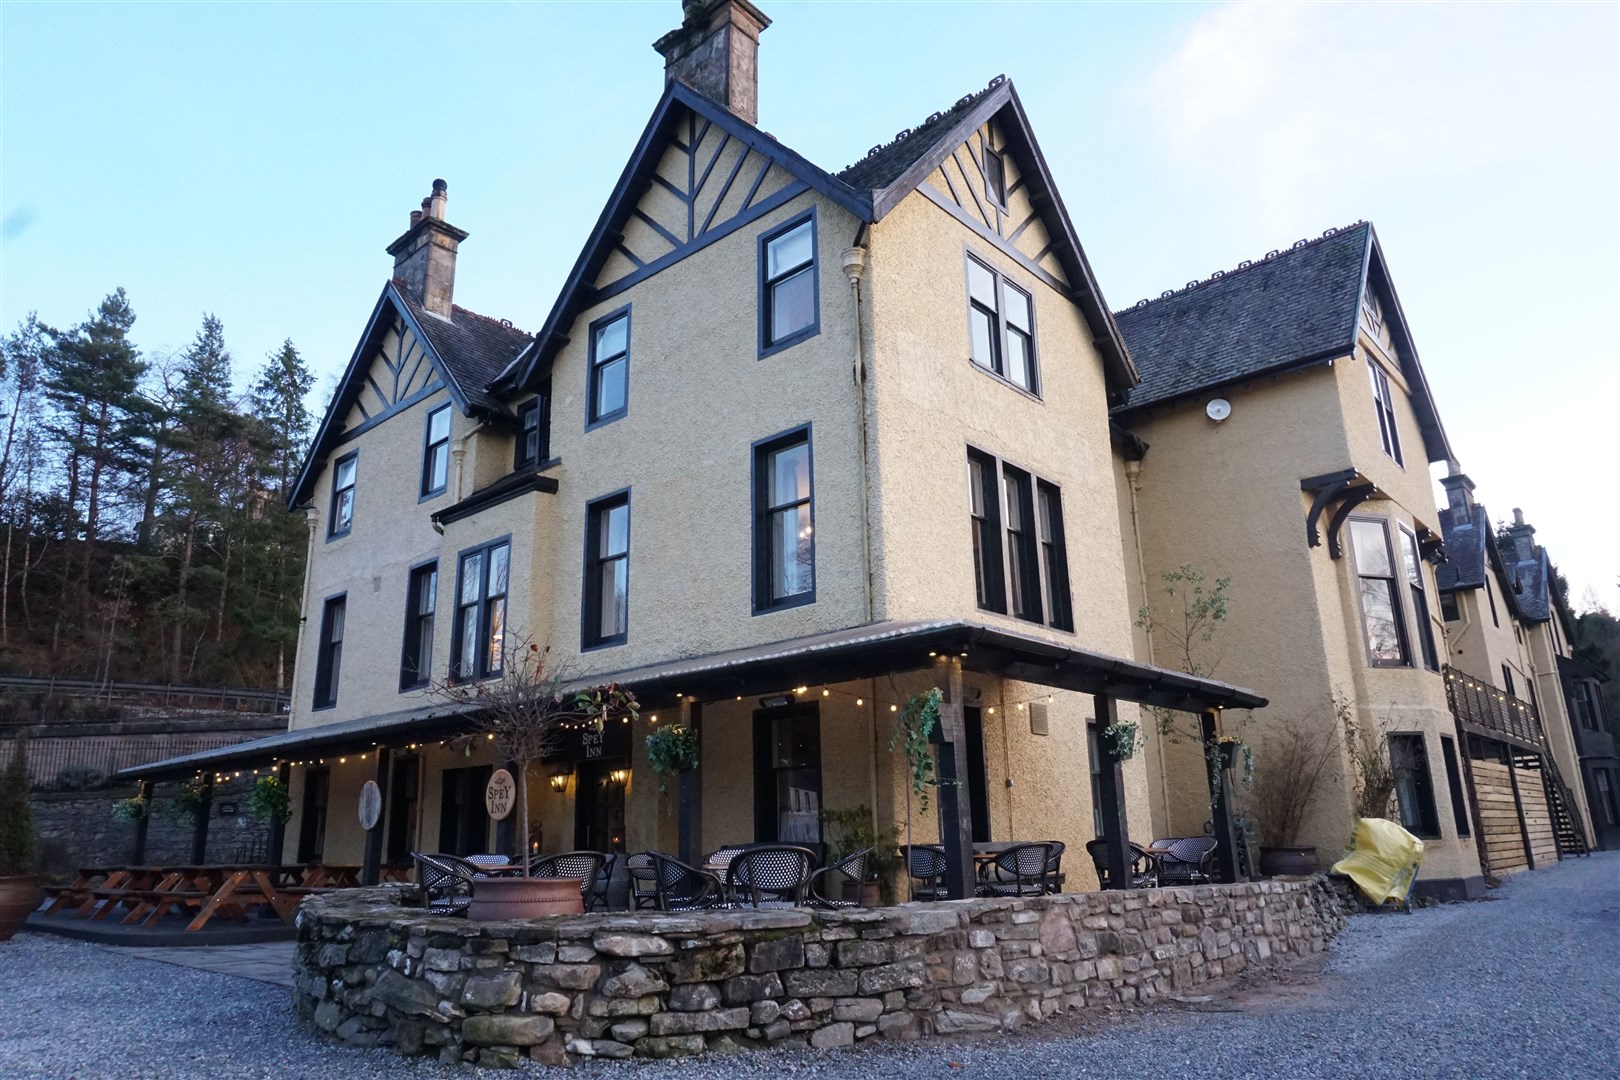 The Craigellachie hotel will host some of the events. Picture: Federica Stefani.